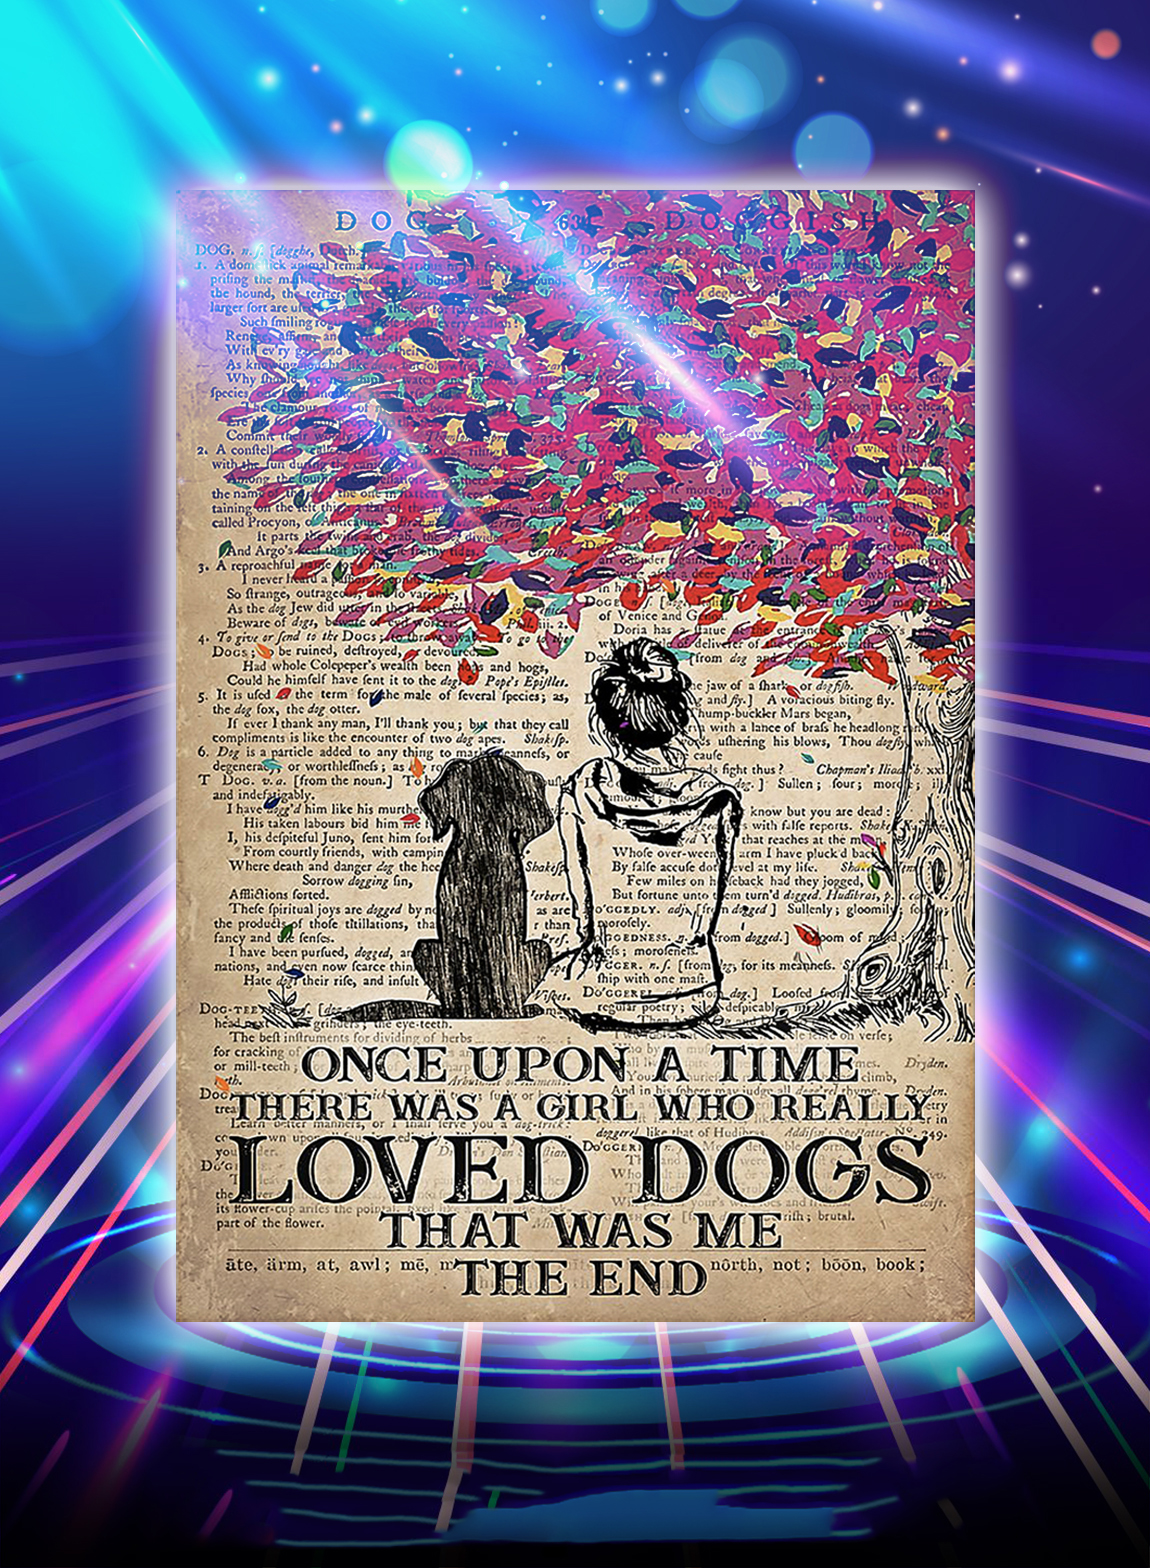 Once upon a time there was a girl who really loved dogs poster - A3